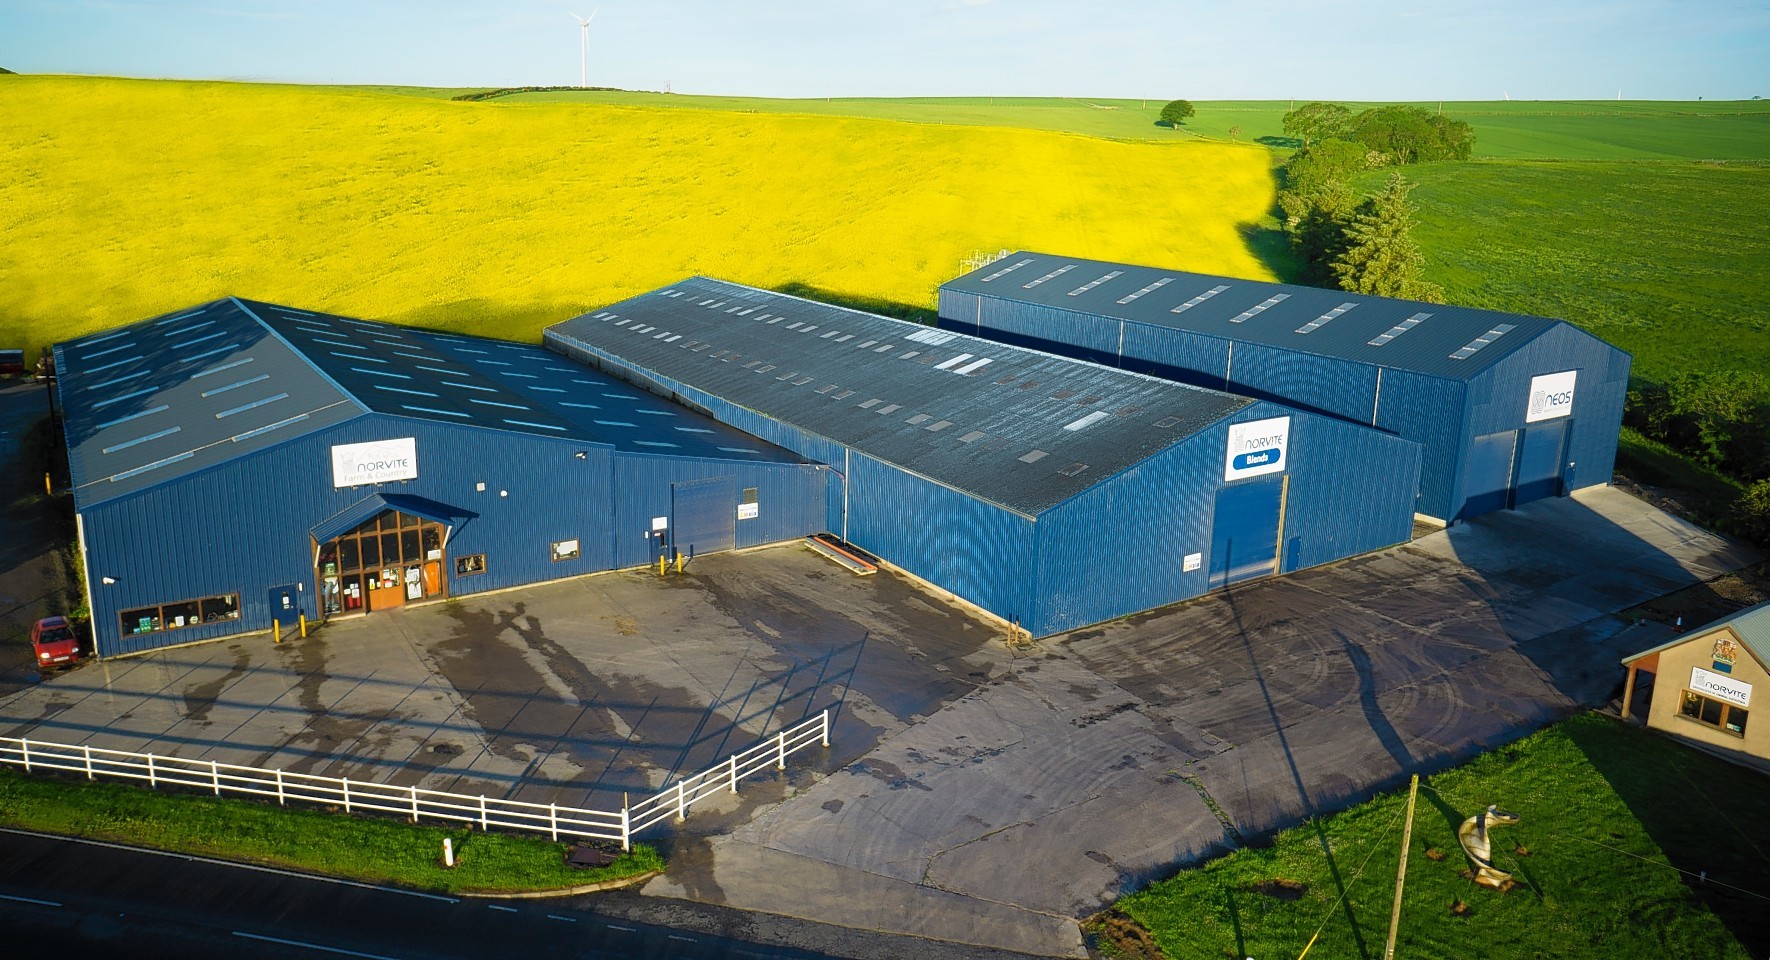 Norvite invests £140,000 in oilseed crushing plant expansion